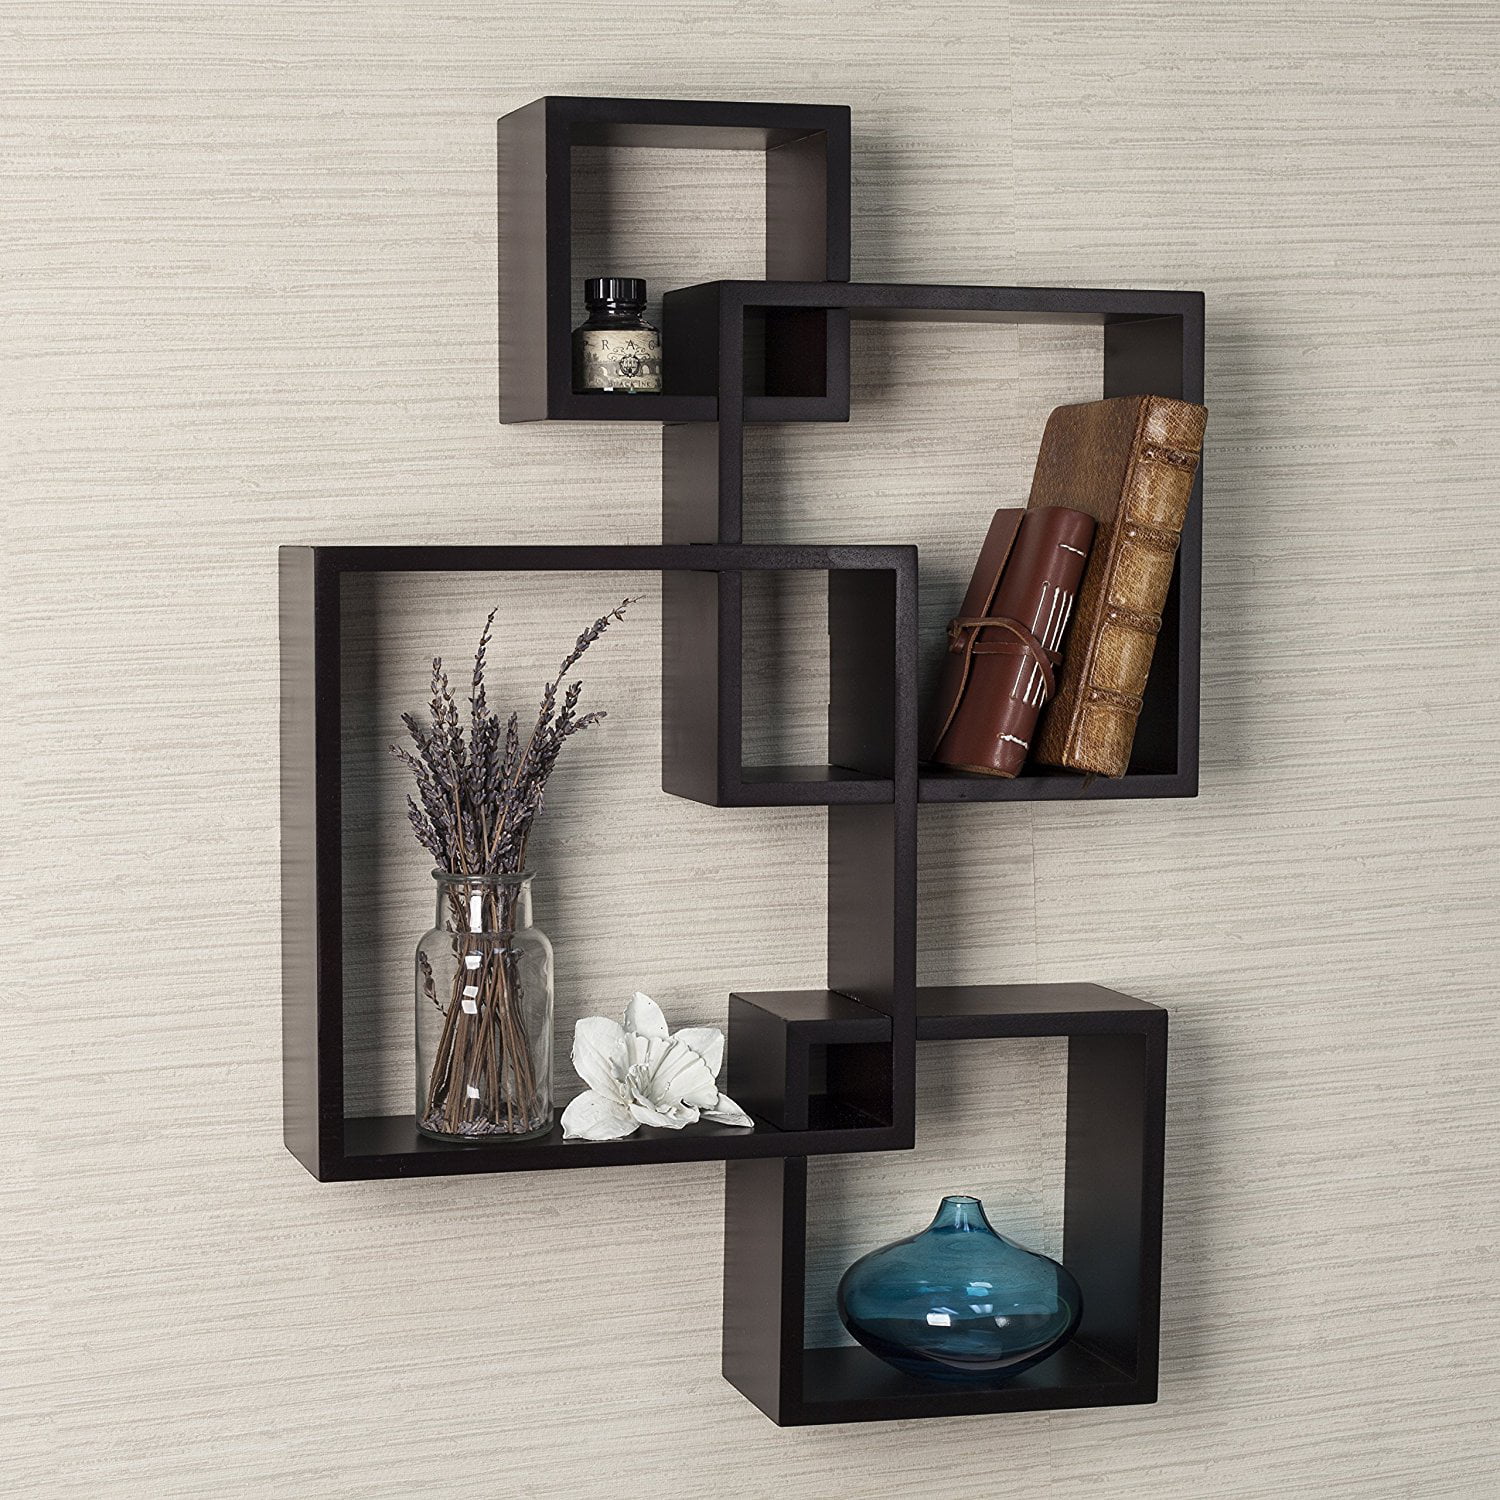 Log 3 Cubes Intersecting Boxes Wall Shelf Home Deco Storage Wall Mount Shelves T